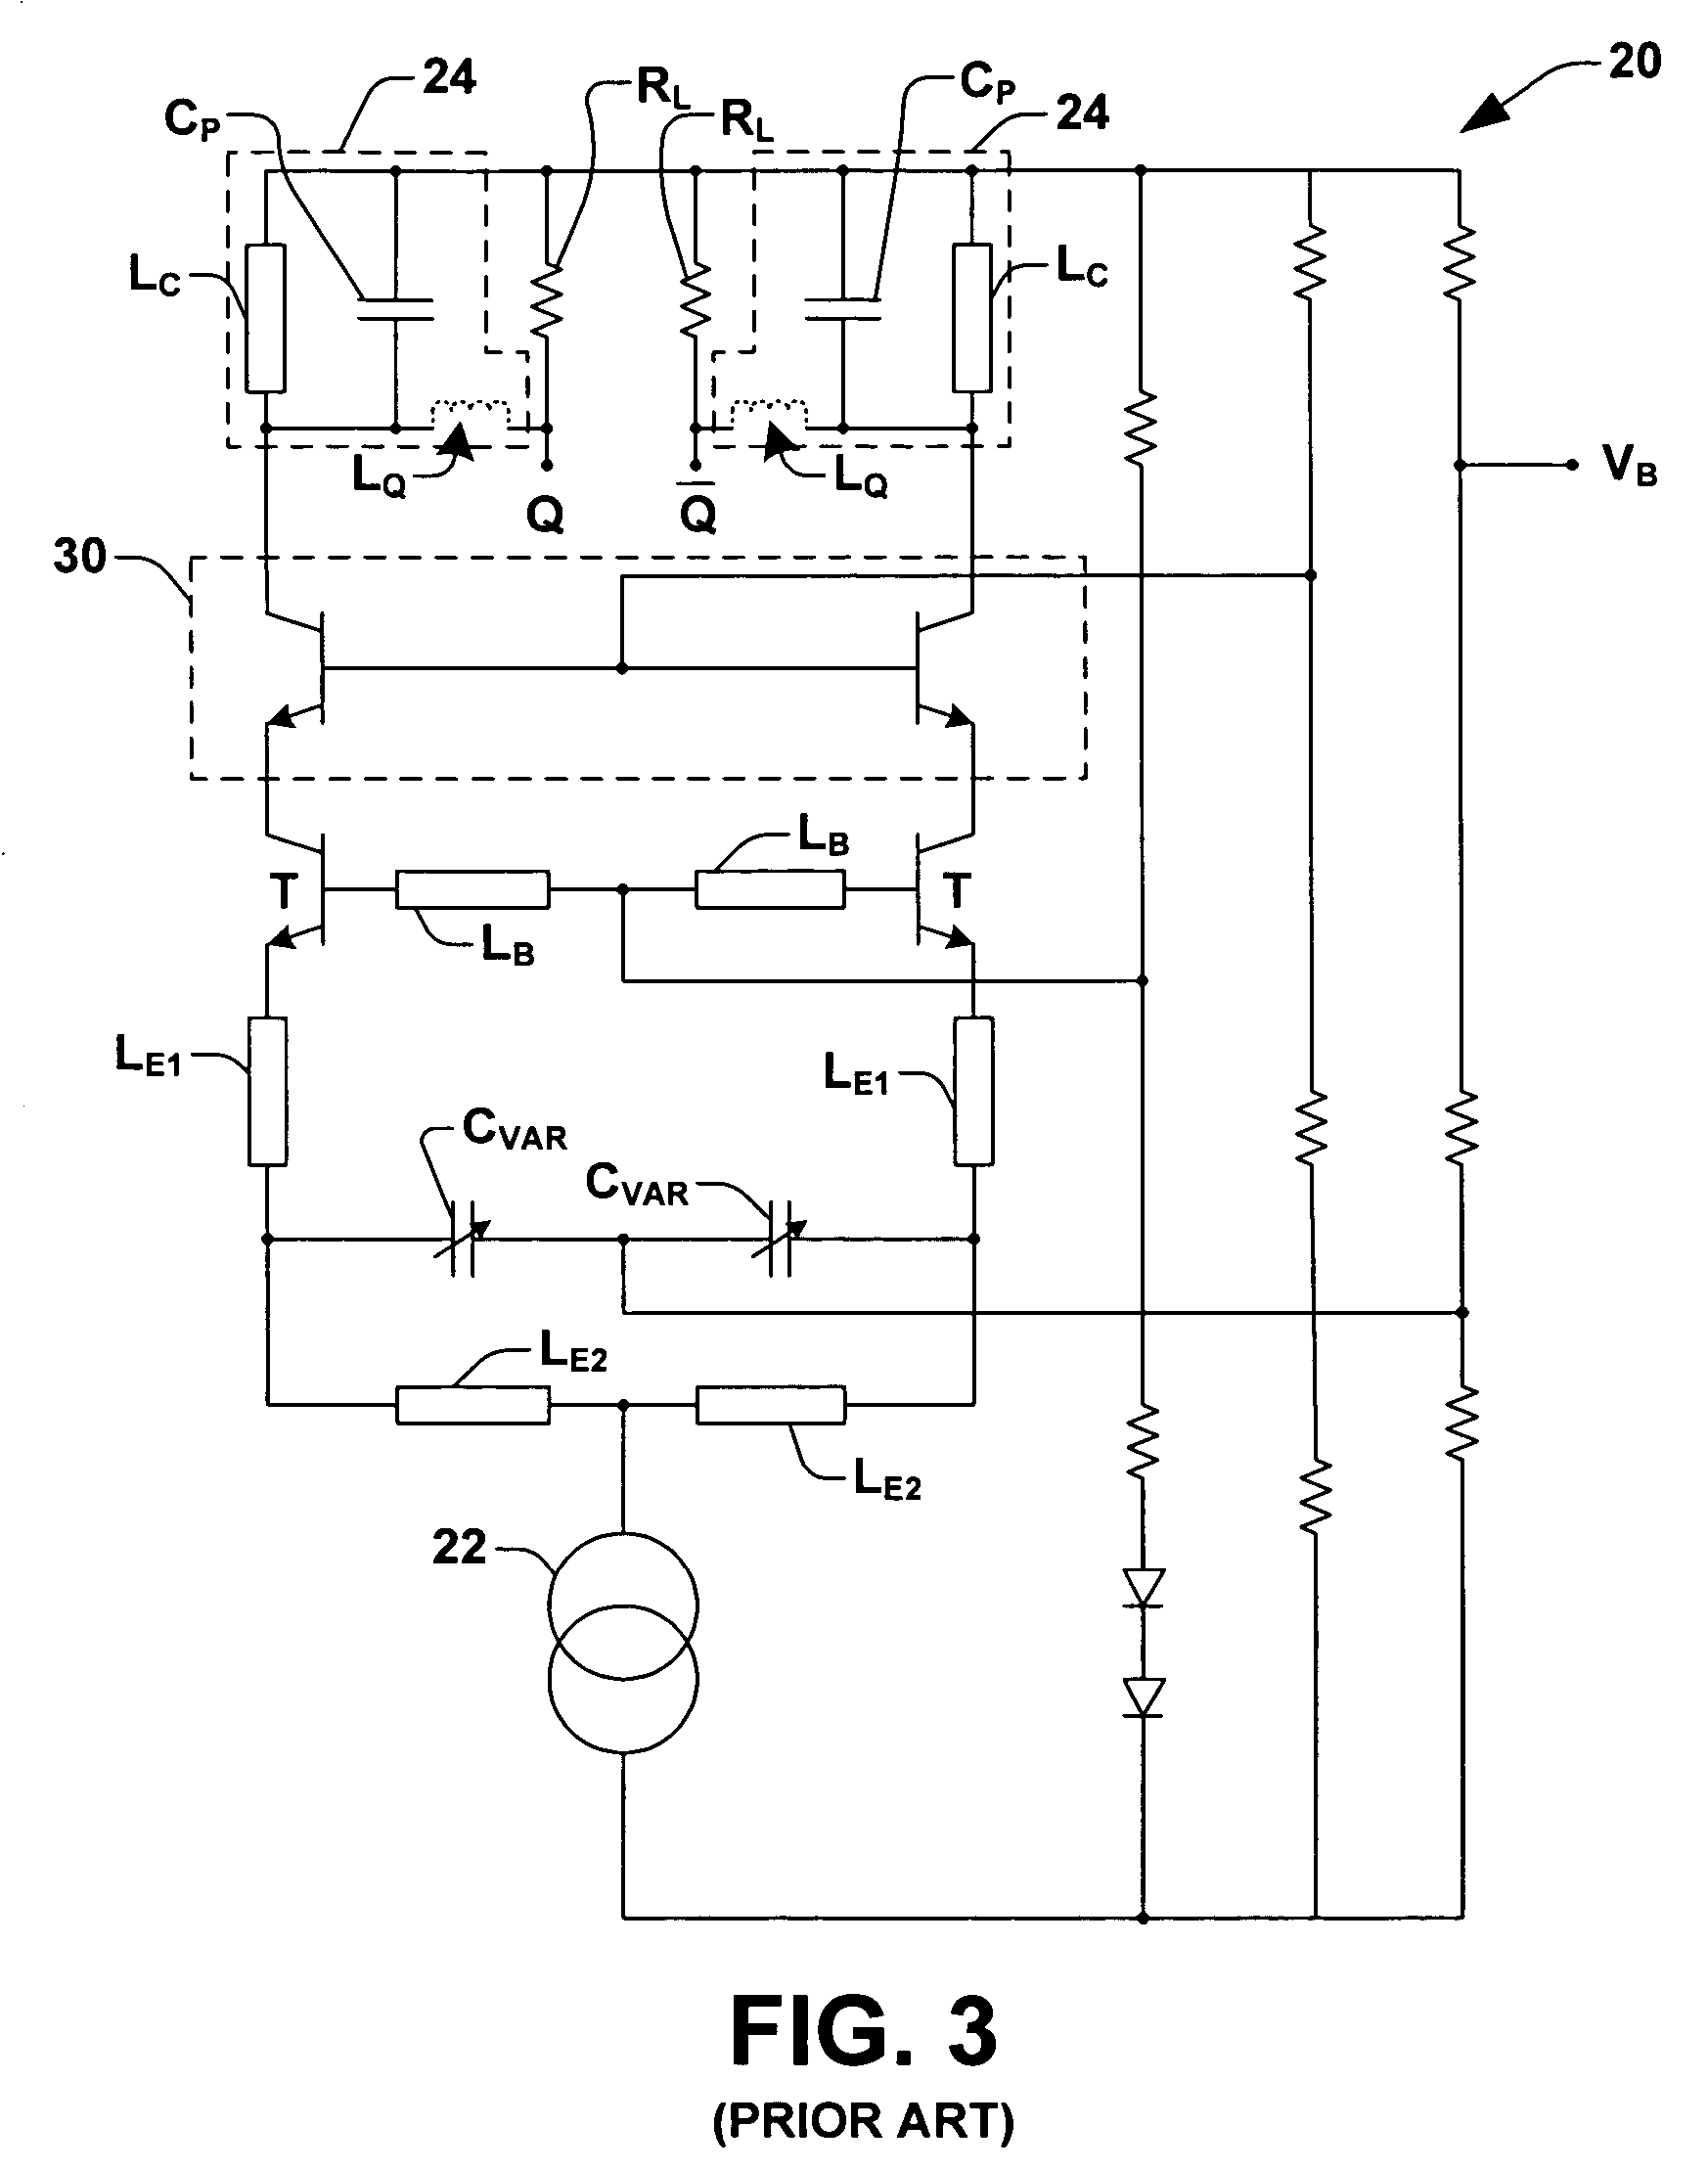 Voltage controlled oscillator (VCO) with output buffer